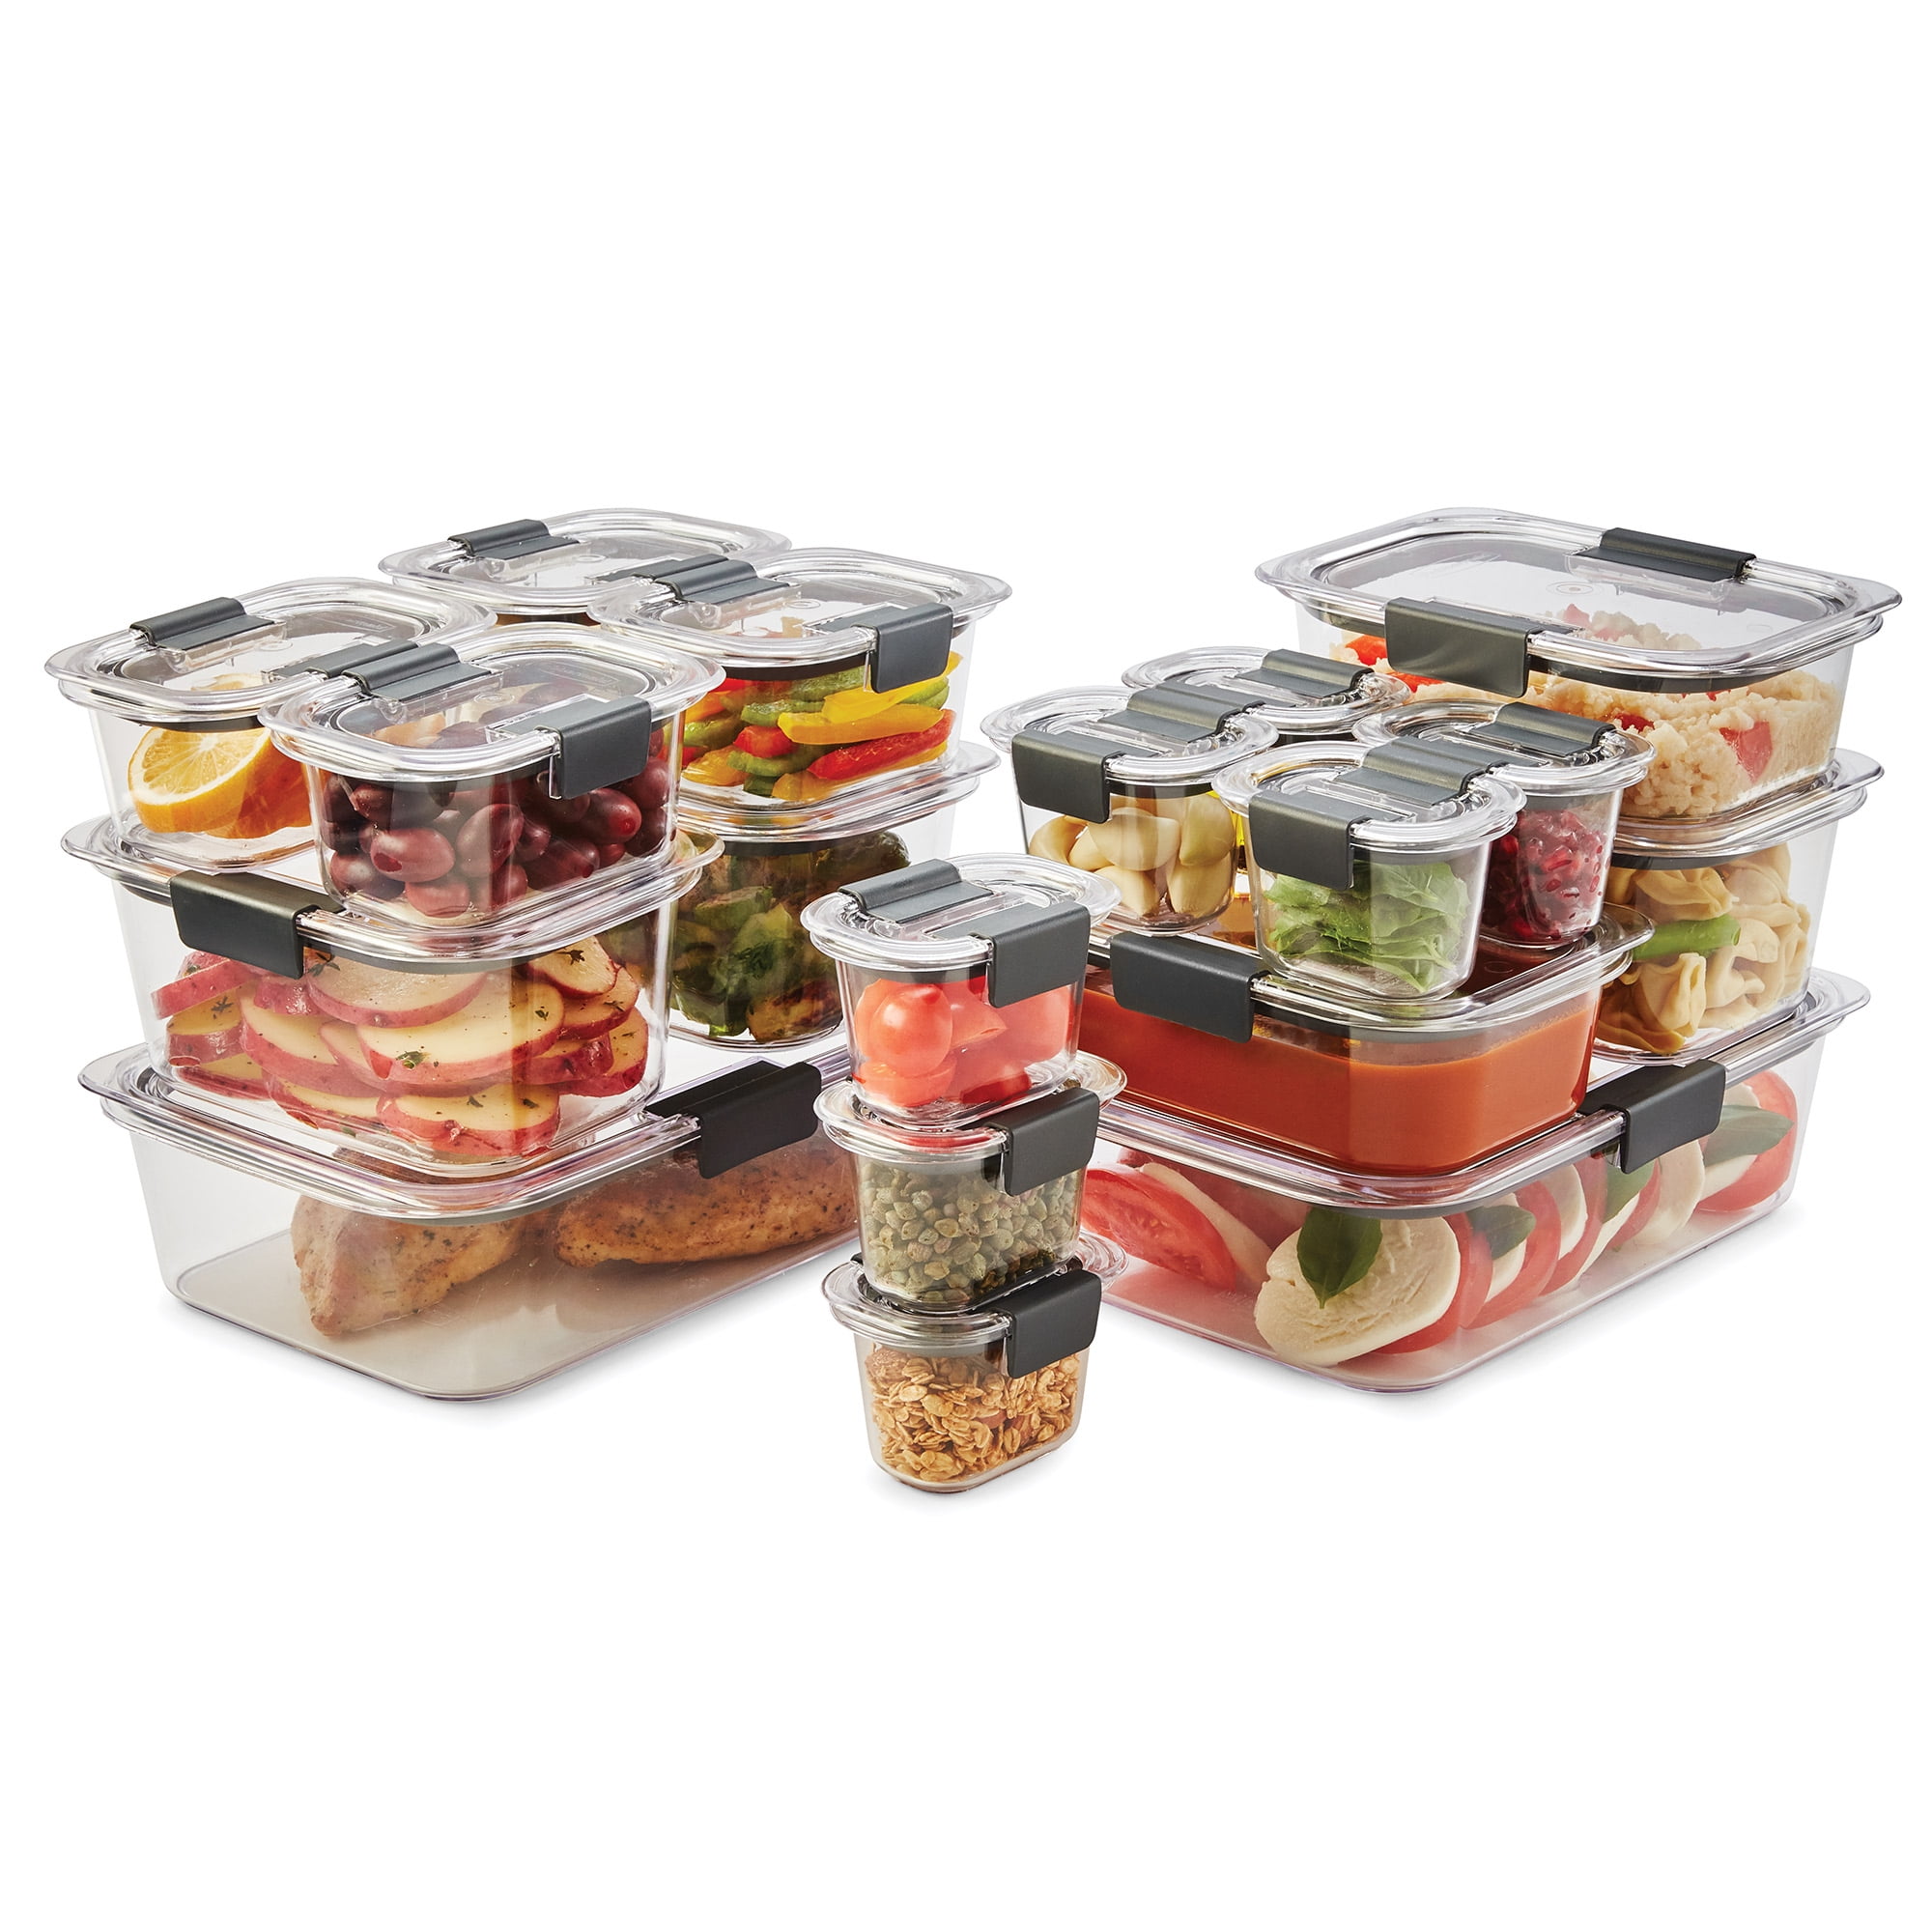 Rubbermaid Brilliance Food Storage Containers, 36 Piece Variety